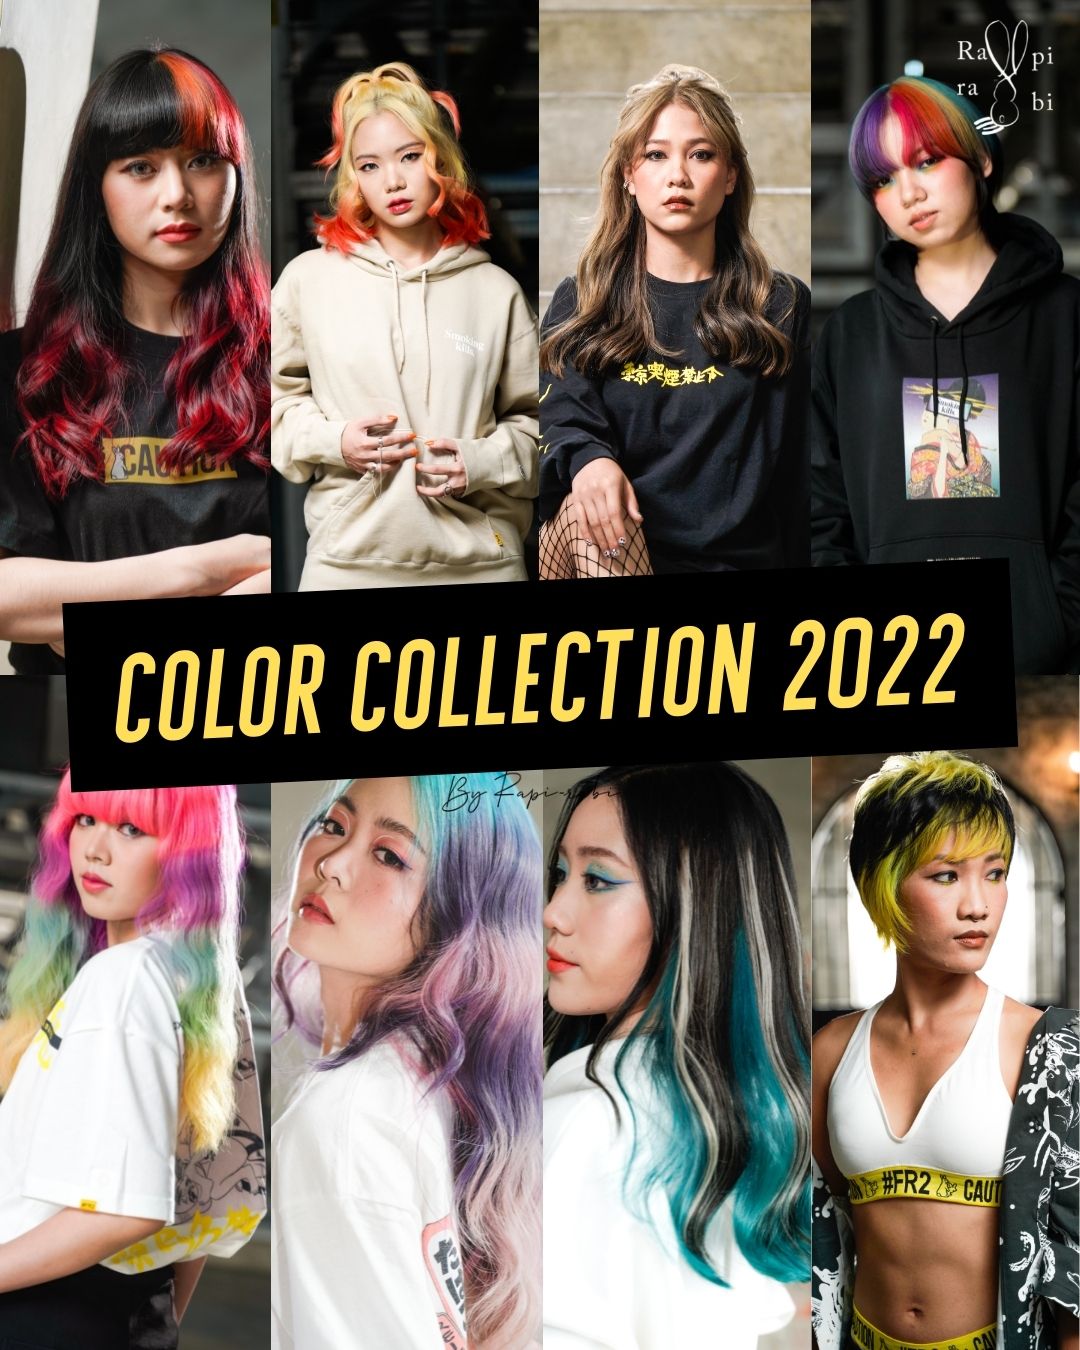 (TH) Color collection 2022 By Rapi-rabi